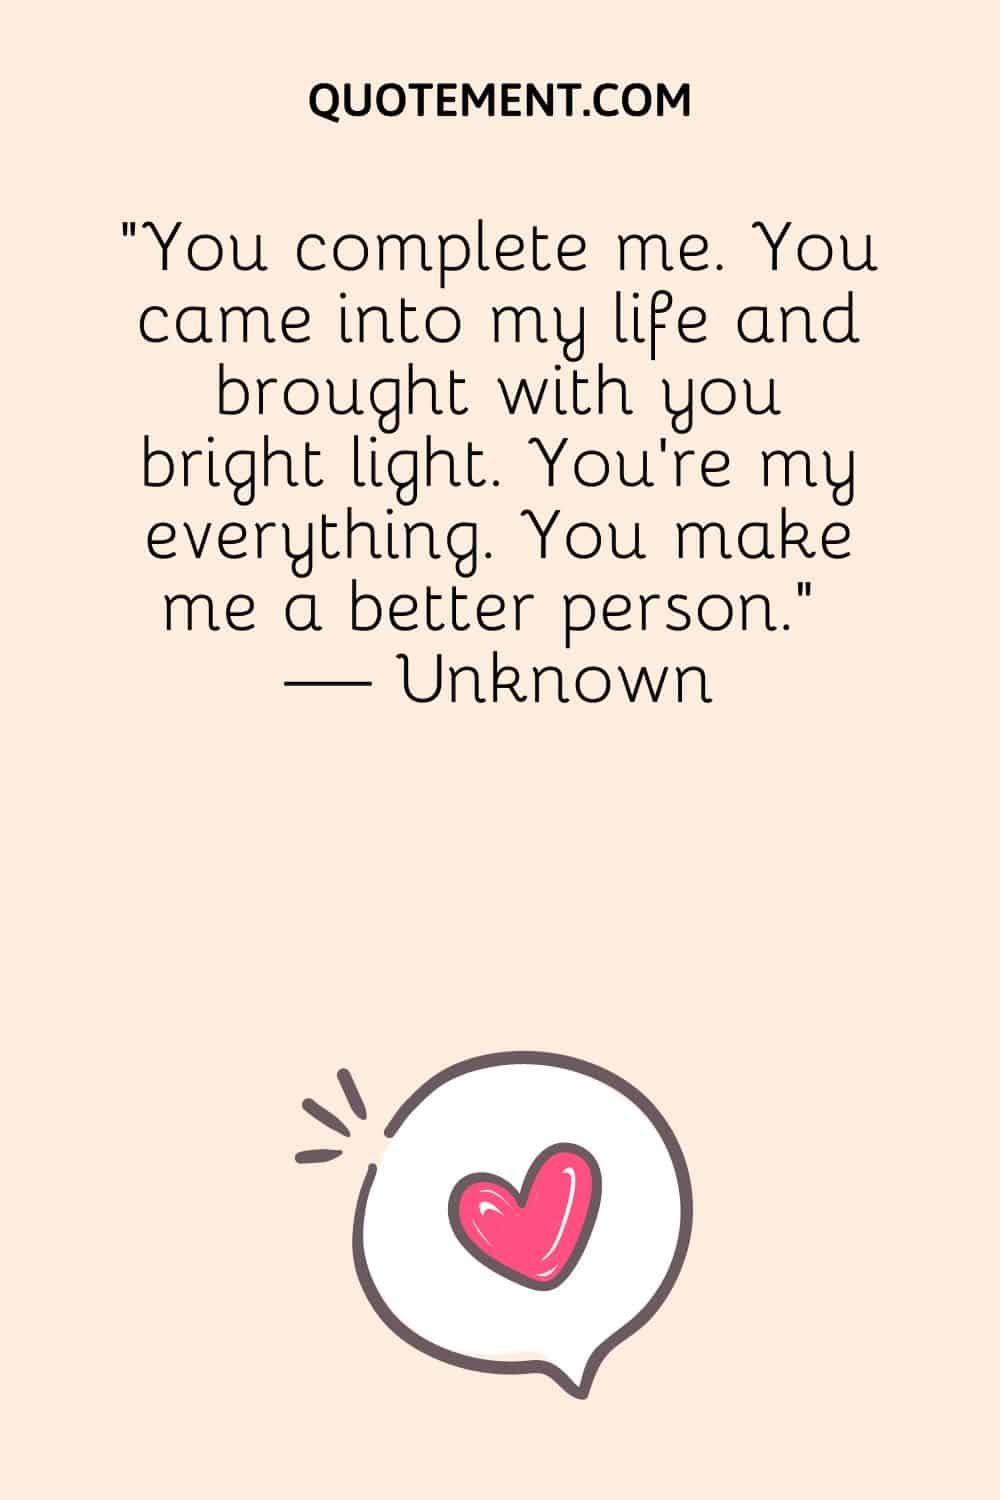 You complete me. You came into my life and brought with you bright light.